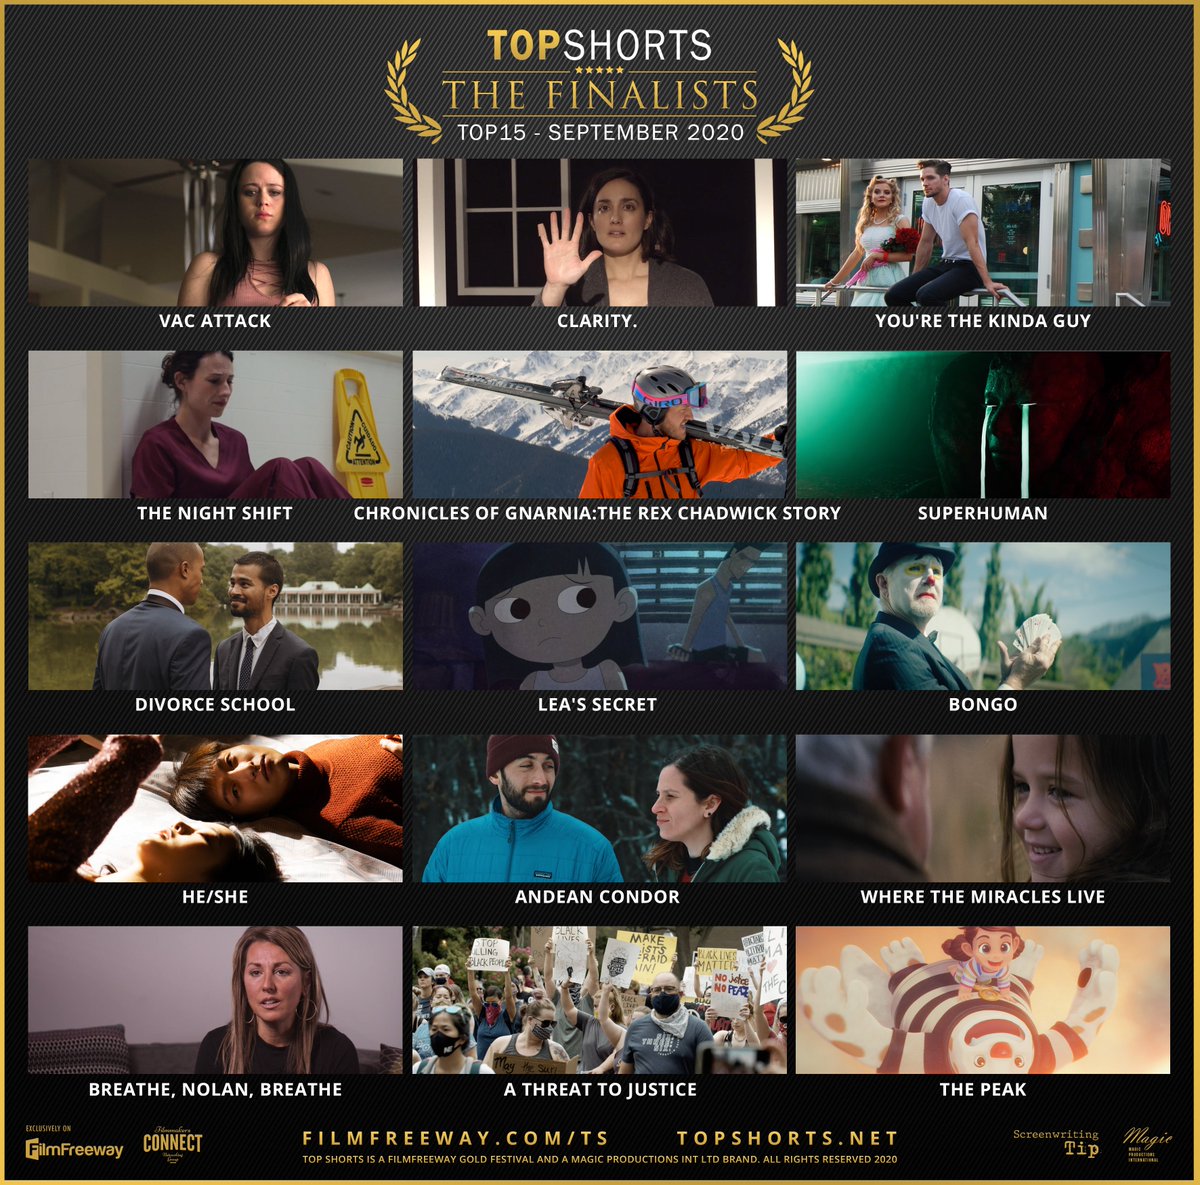 Top 15 films - Congratulations to the finalists! filmfreeway.com/ts #topshorts #topshortsfilmfestival #filmfestival #filmfreeway #imdb #magicint #filmcon #filmmakersconnect #top15 #top15films #topshorts21qualifying